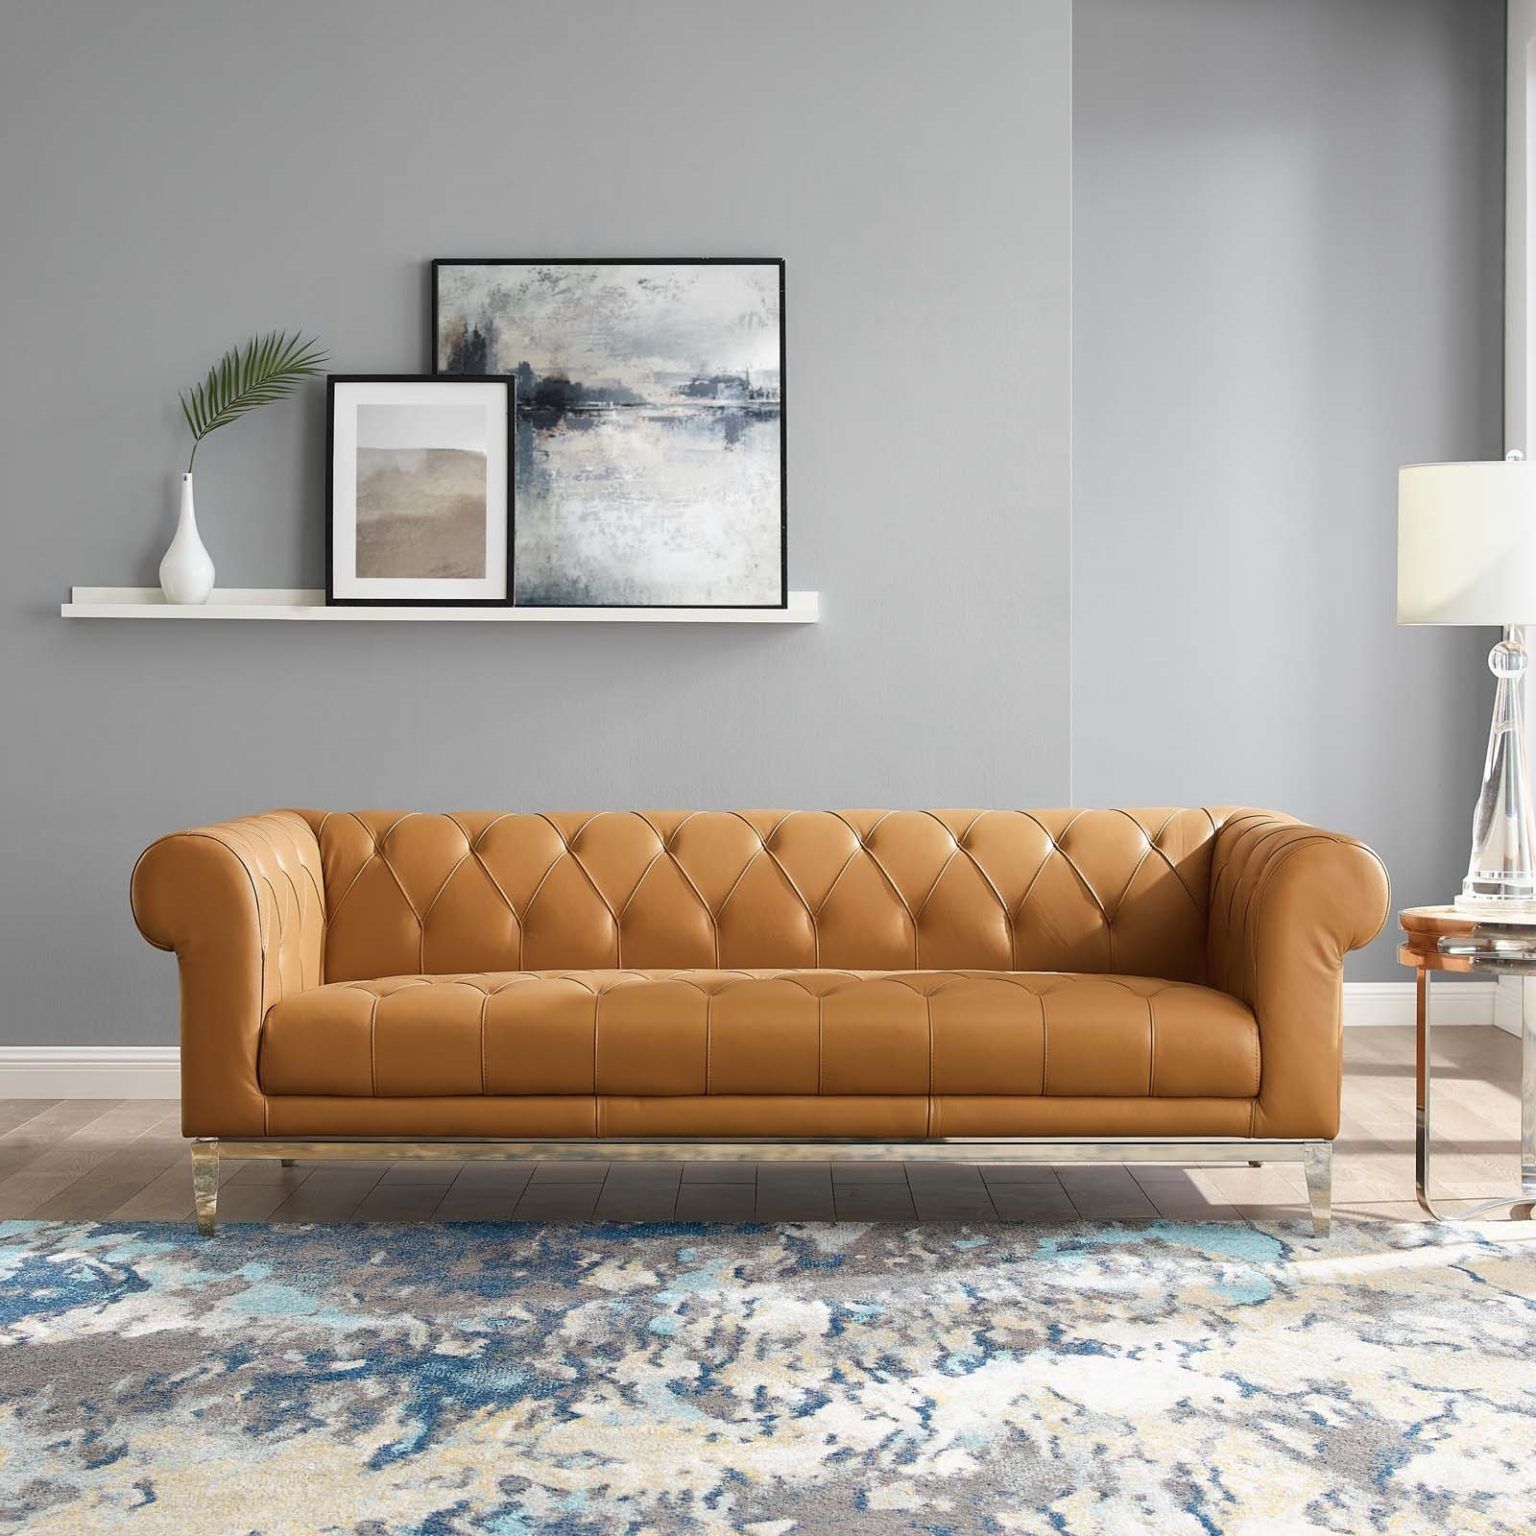 Idyll Tufted Button Upholstered Leather Chesterfield Sofa In Tan – Hyme Within Tufted Upholstered Sofas (View 2 of 20)